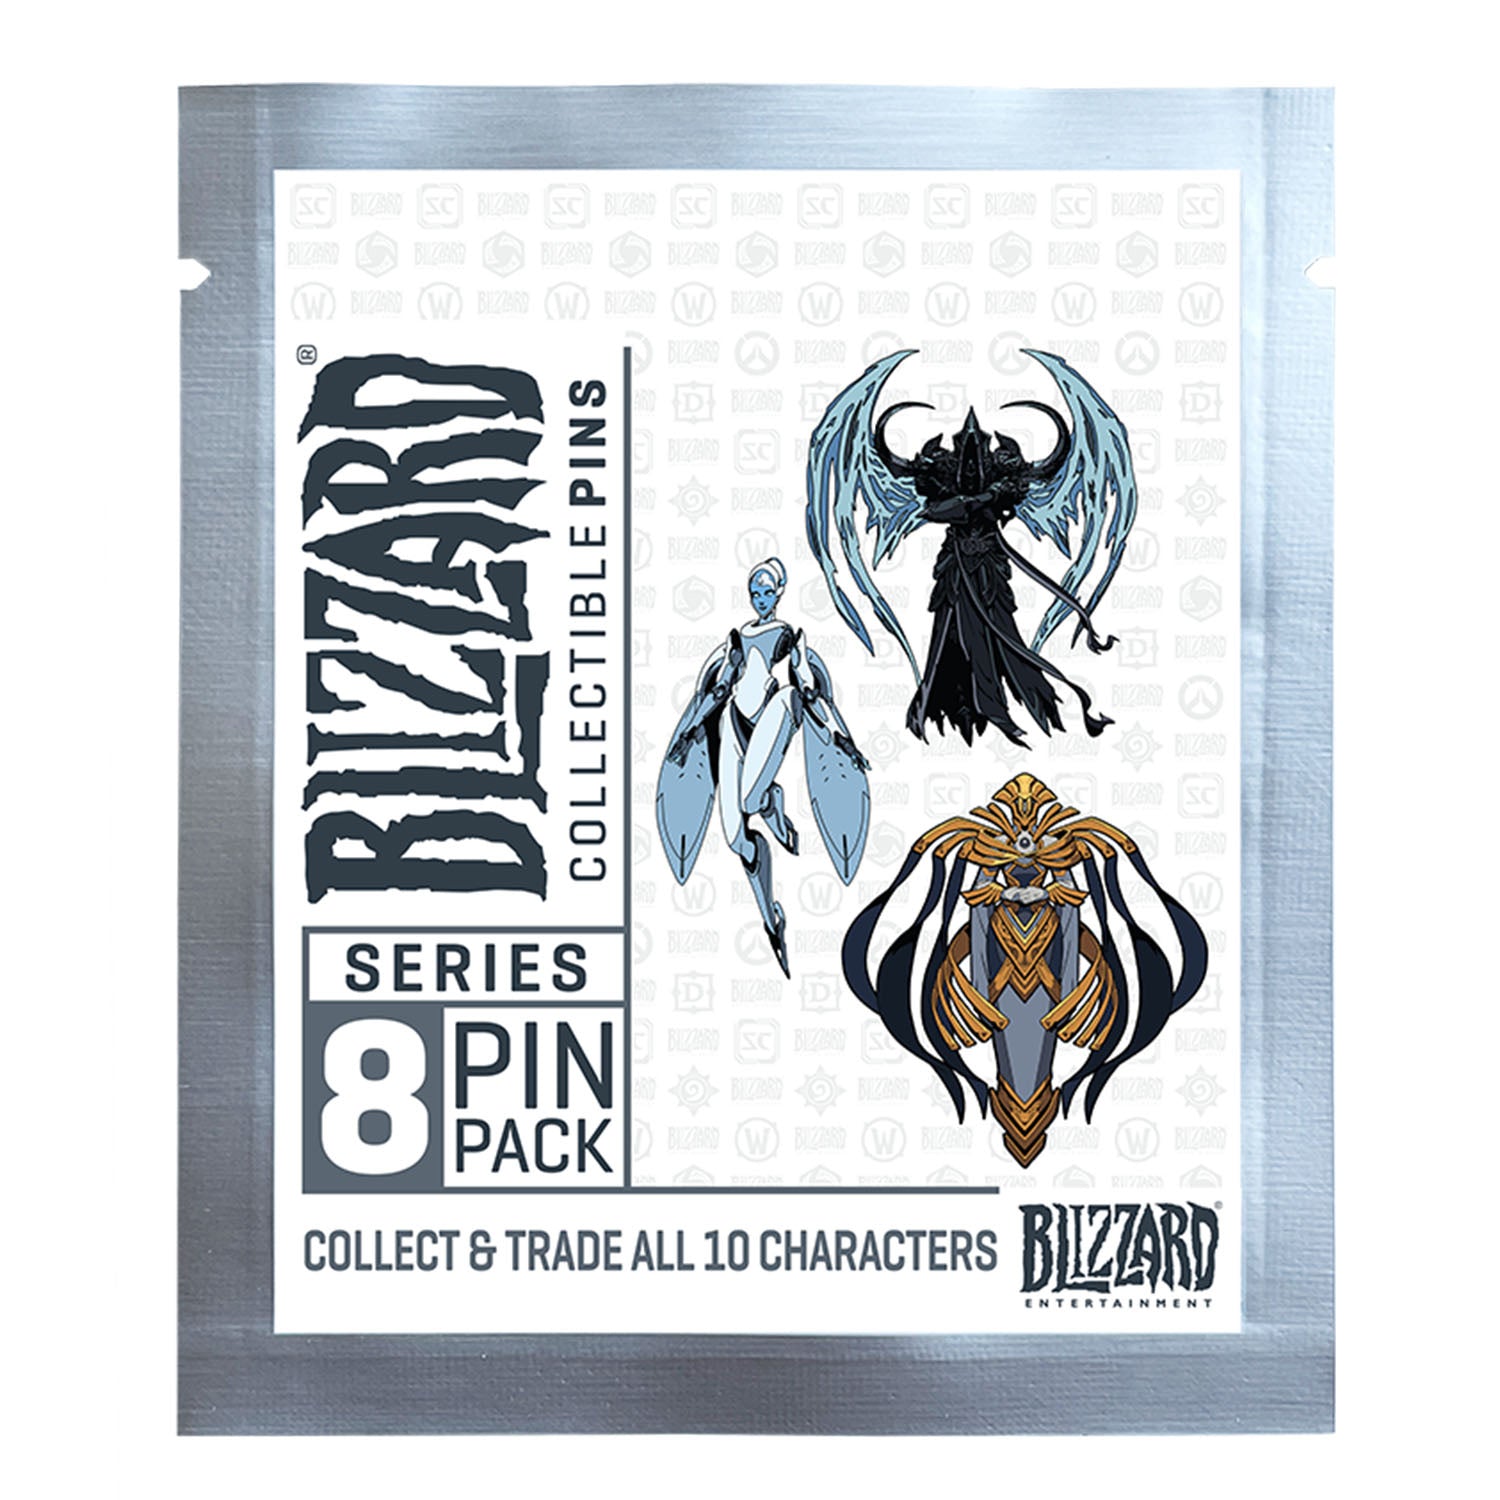 Blizzard Series 8 Blind Packs- 5 Pack Set - Front View